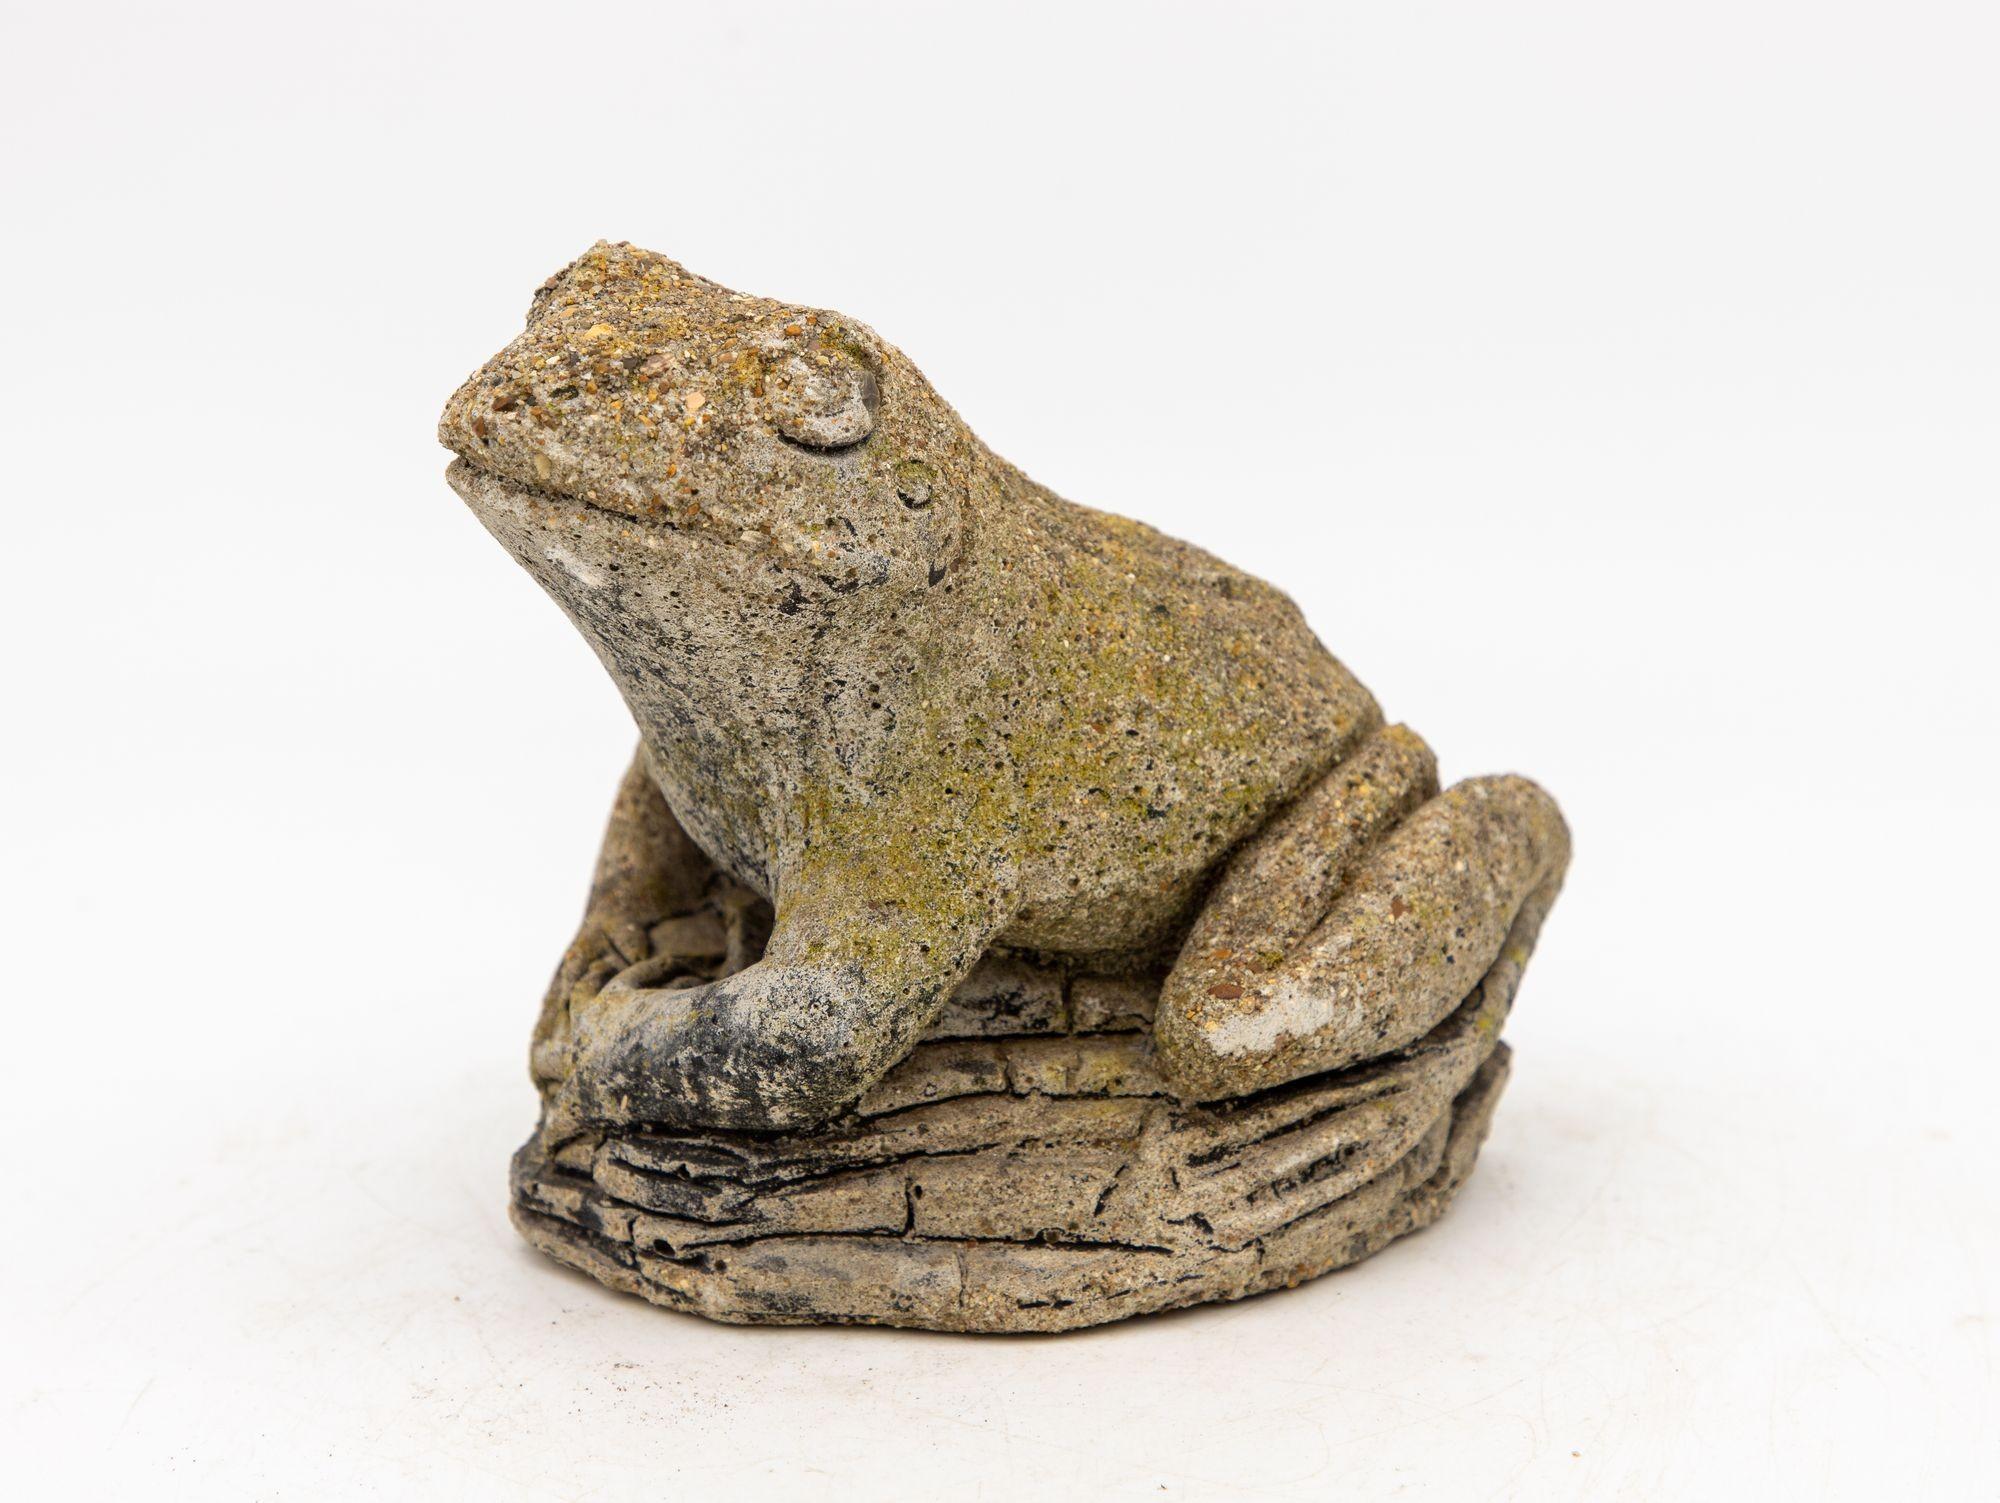 This delightful reconstituted stone frog garden ornament brings a touch of whimsy and charm to your outdoor space. This ornament features an honest patina, giving it an authentic and aged appearance, and is covered in natural moss that adds to its